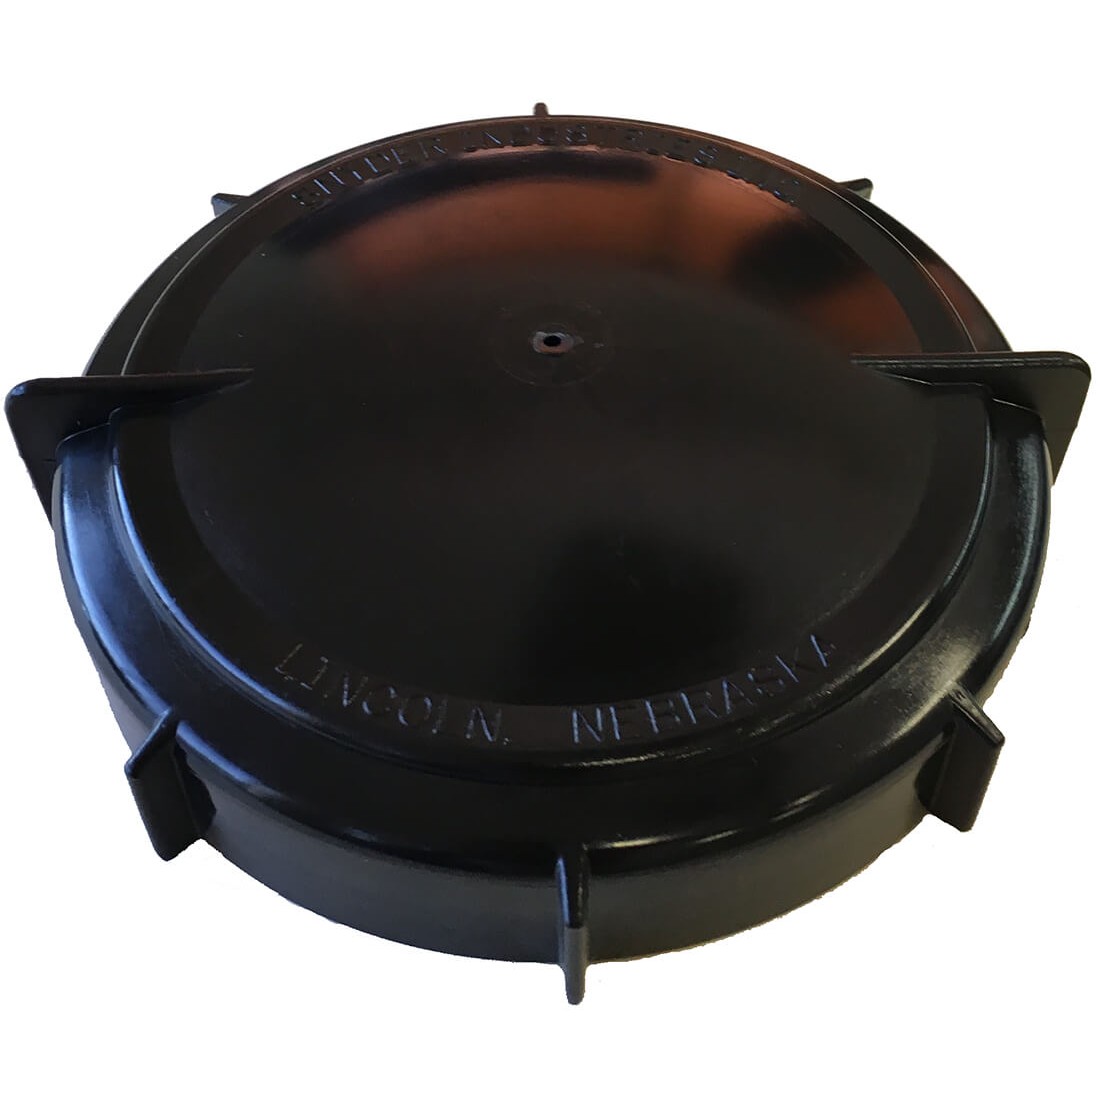 14 Inch Black HDPE Lid With Vent, 34701243